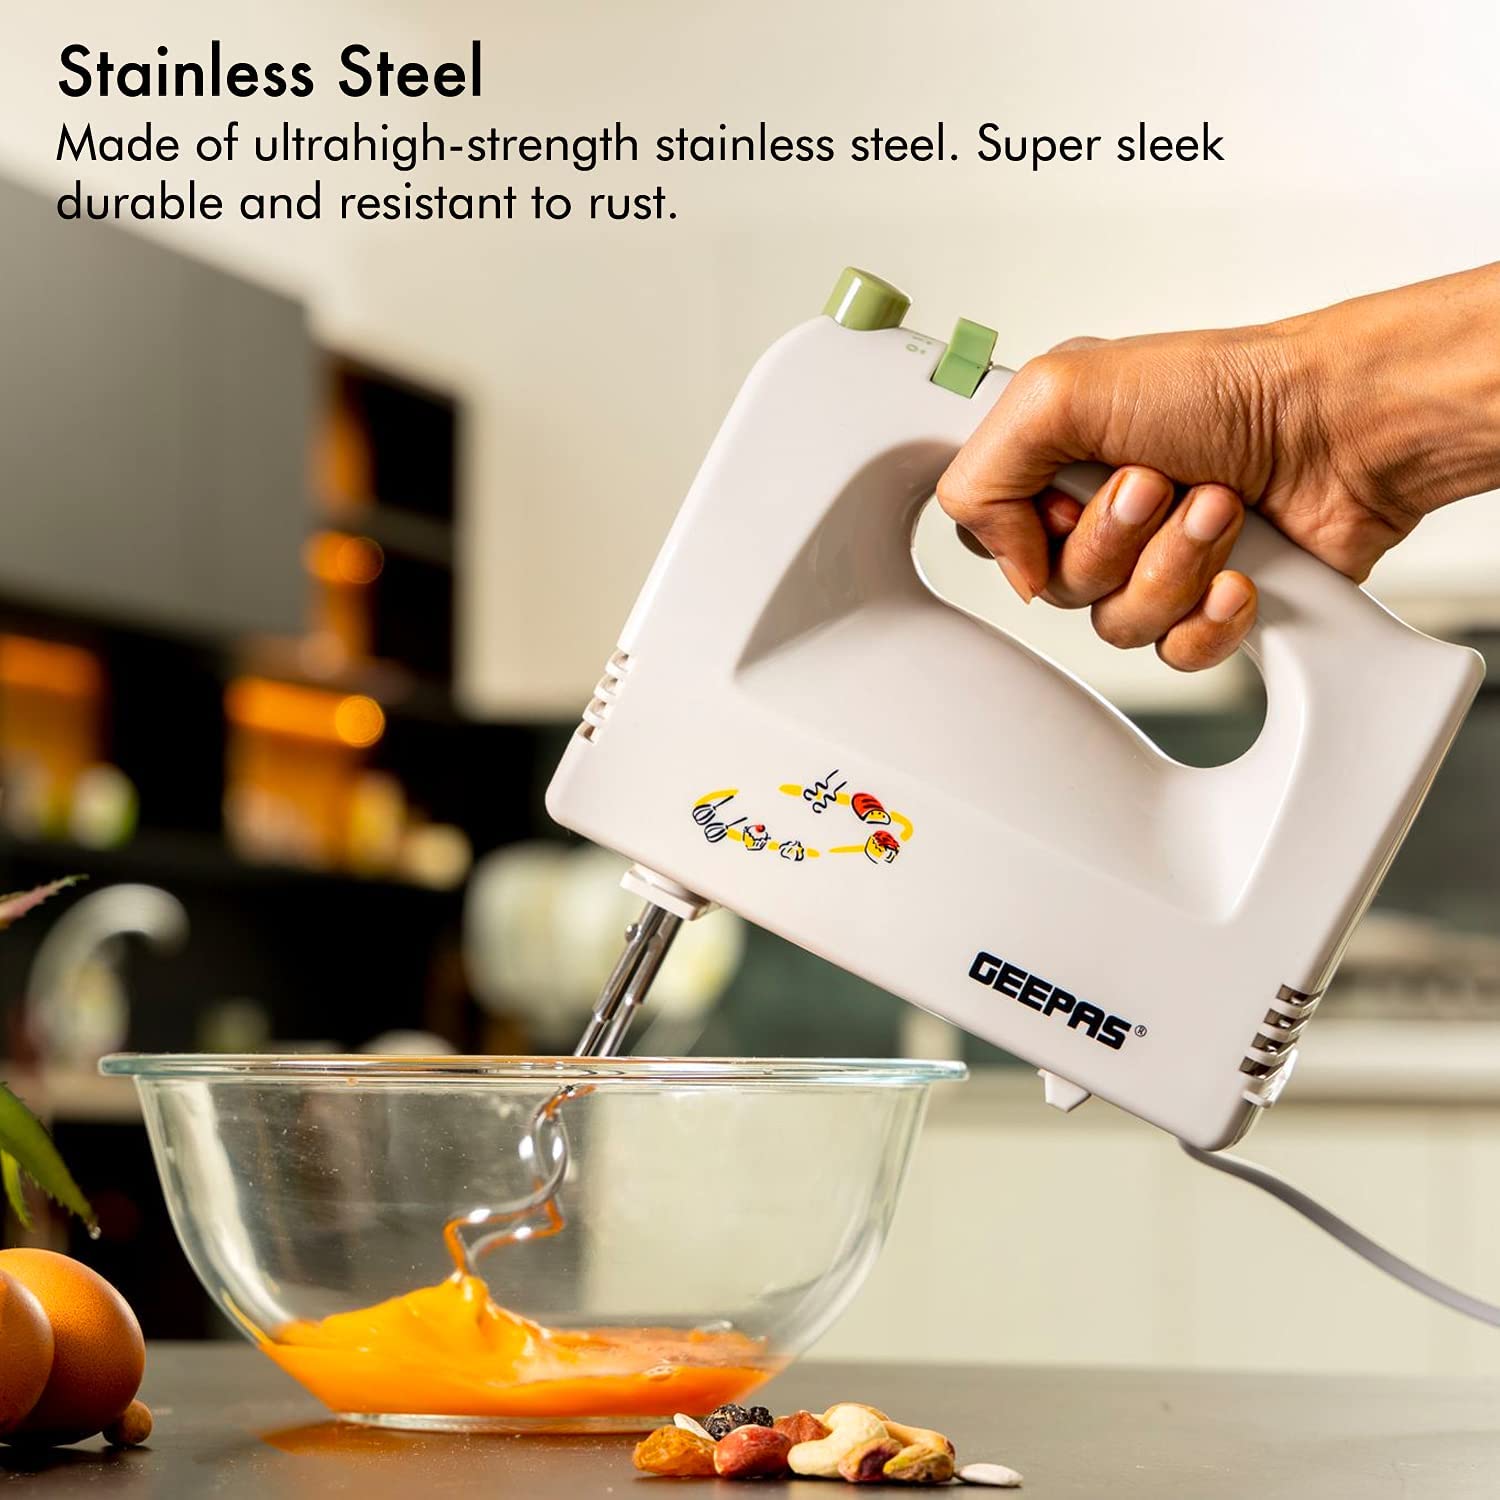 Geepas Electric Hand Mixer For Baking 160W | Kitchen Appliances | Halabh.com